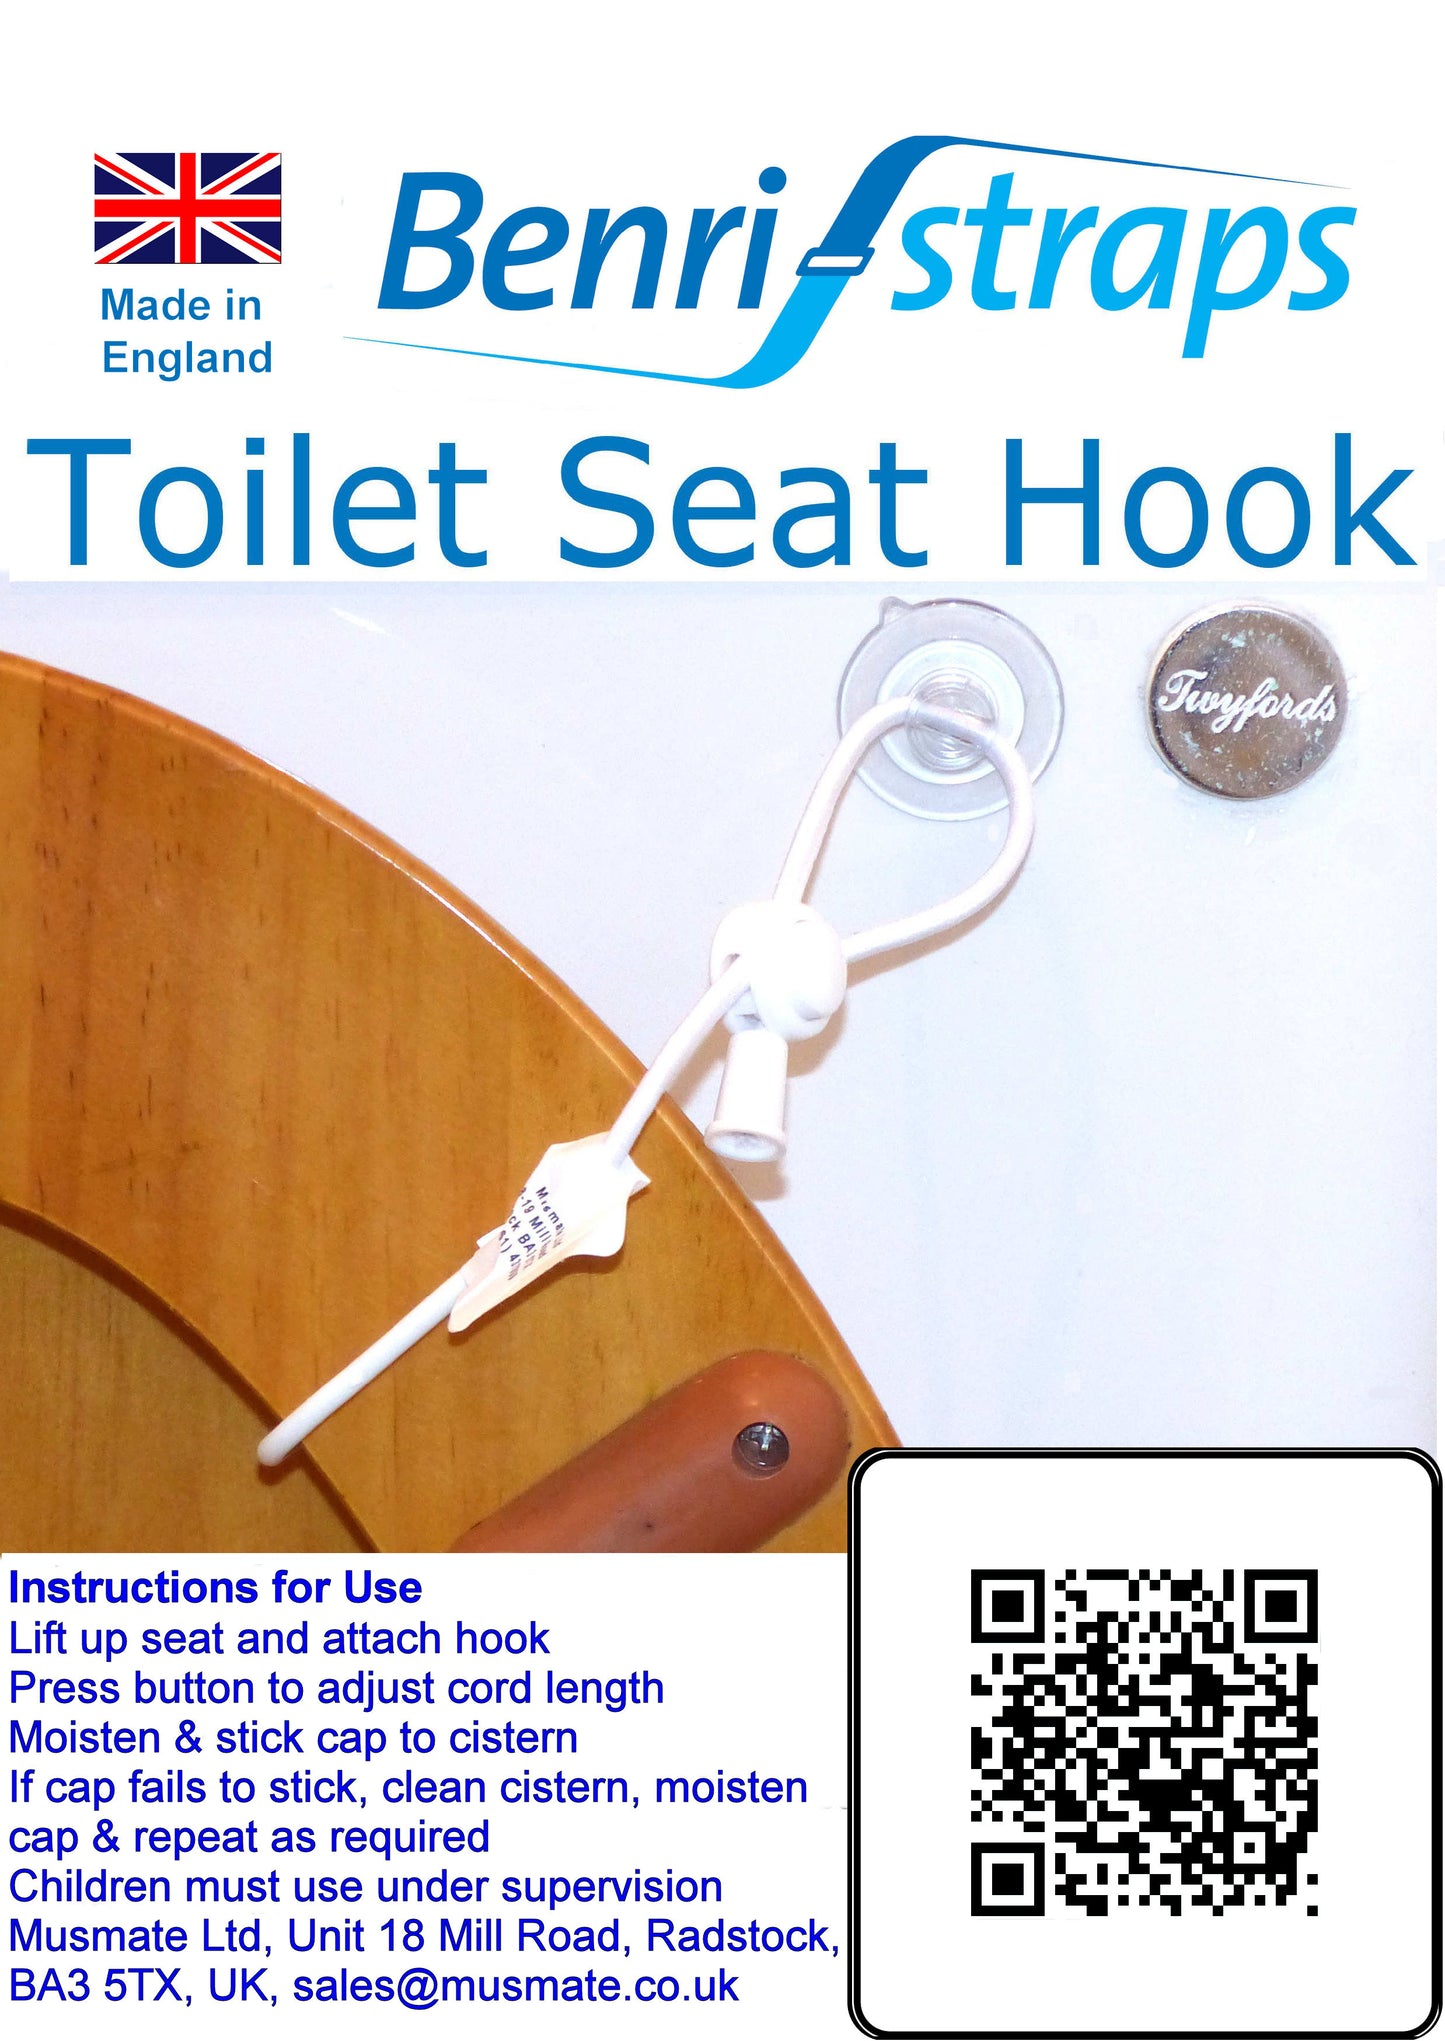 Toilet Seat Hook to Keep the Toilet Seat Up label